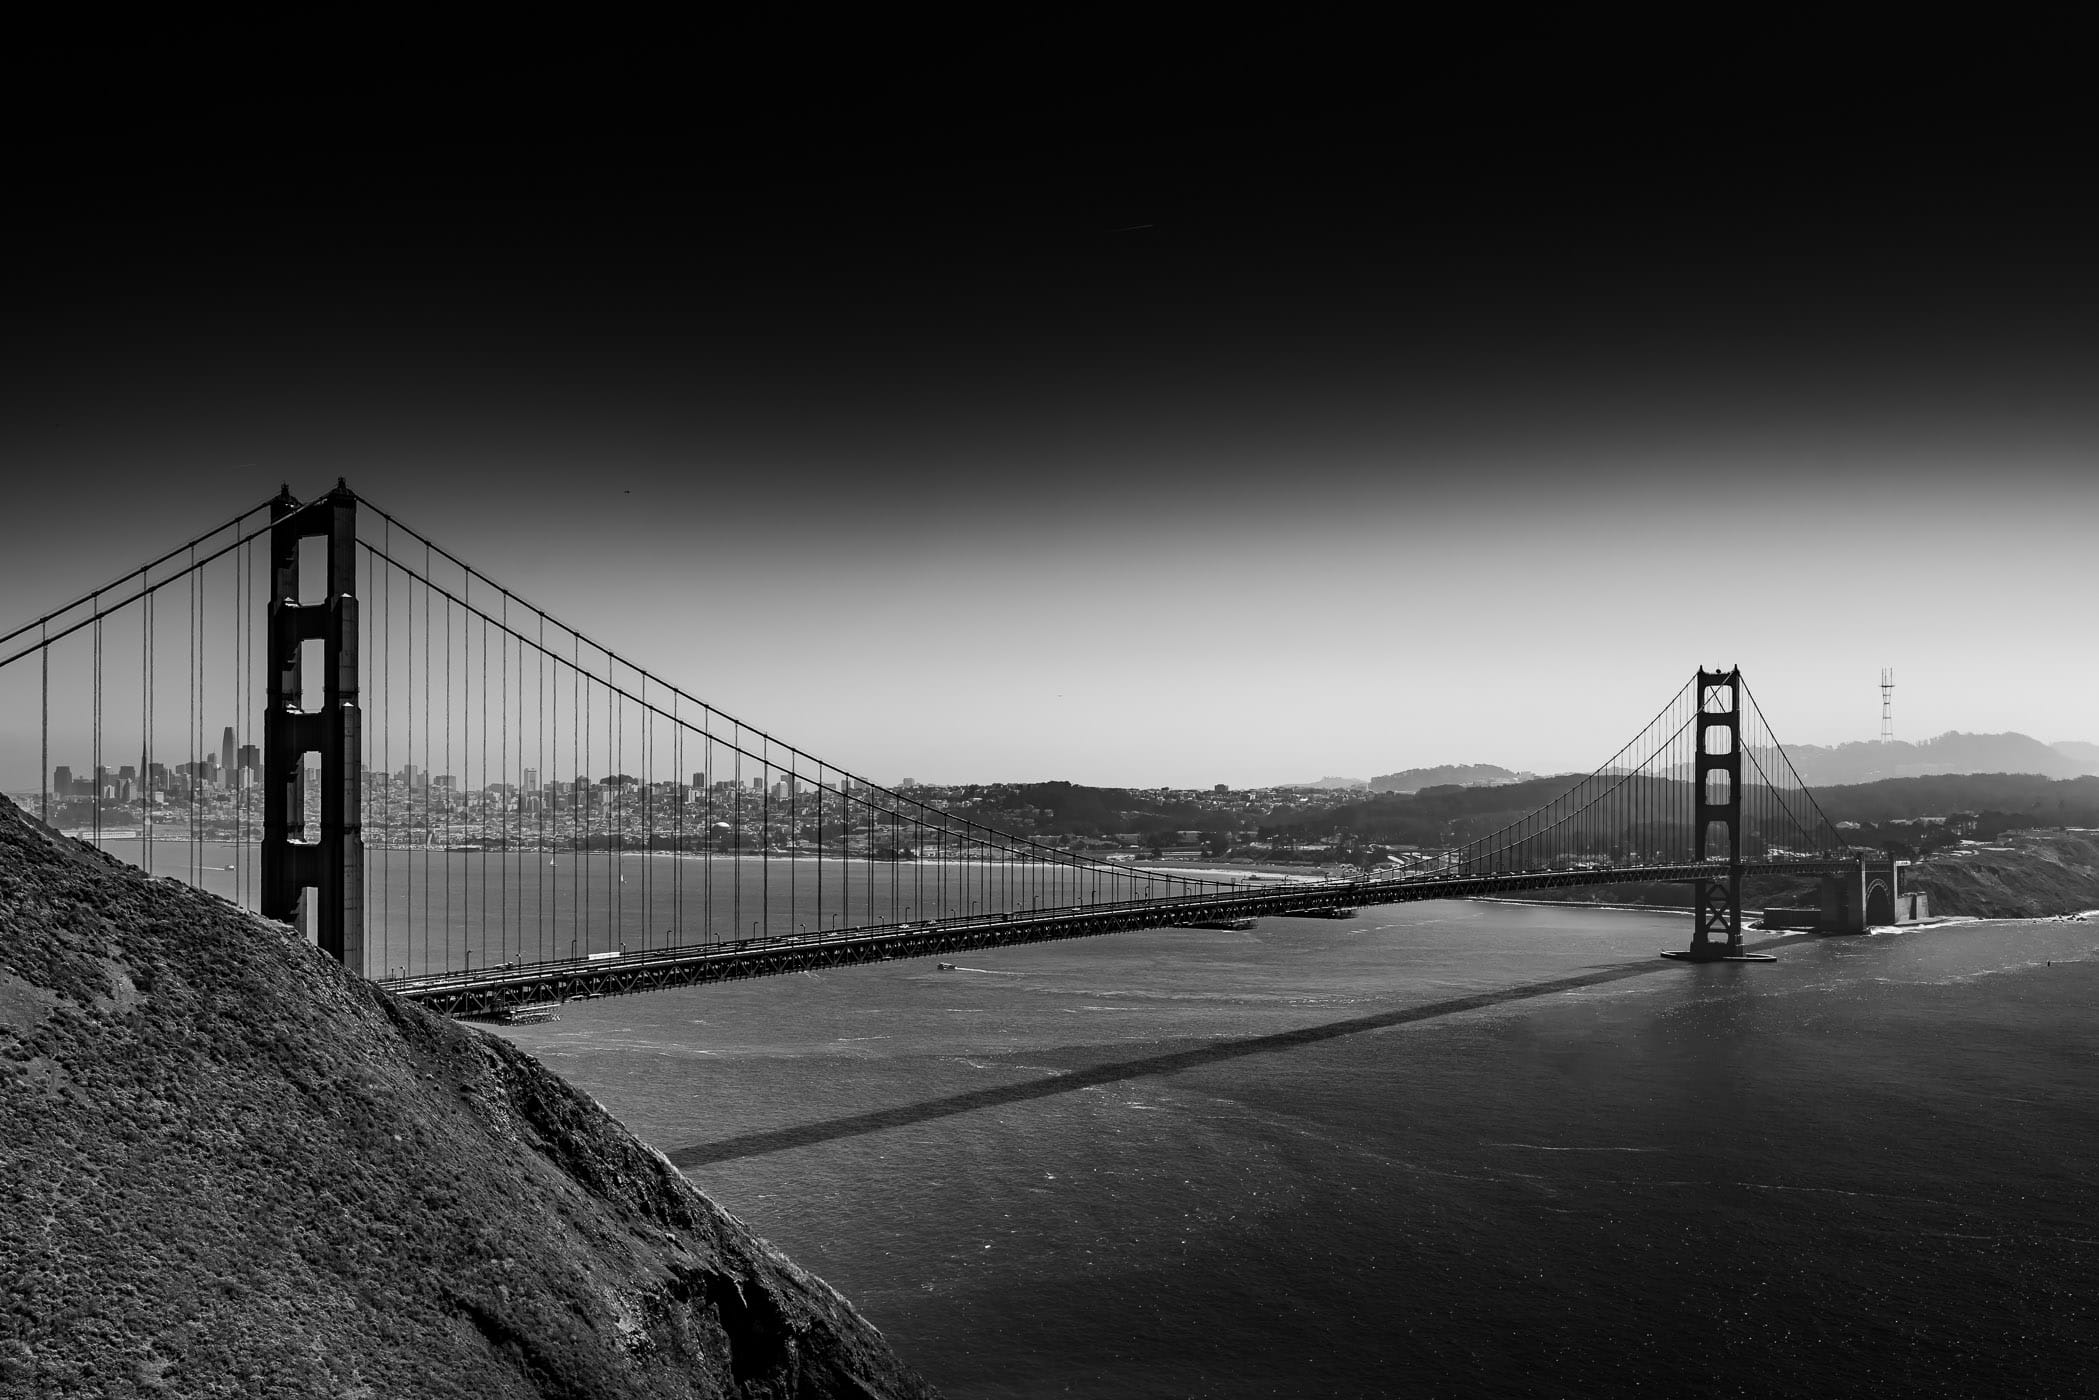 The Golden Gate Bridge spans the entrance to San Francisco Bay as seen from the Marin Headlands.